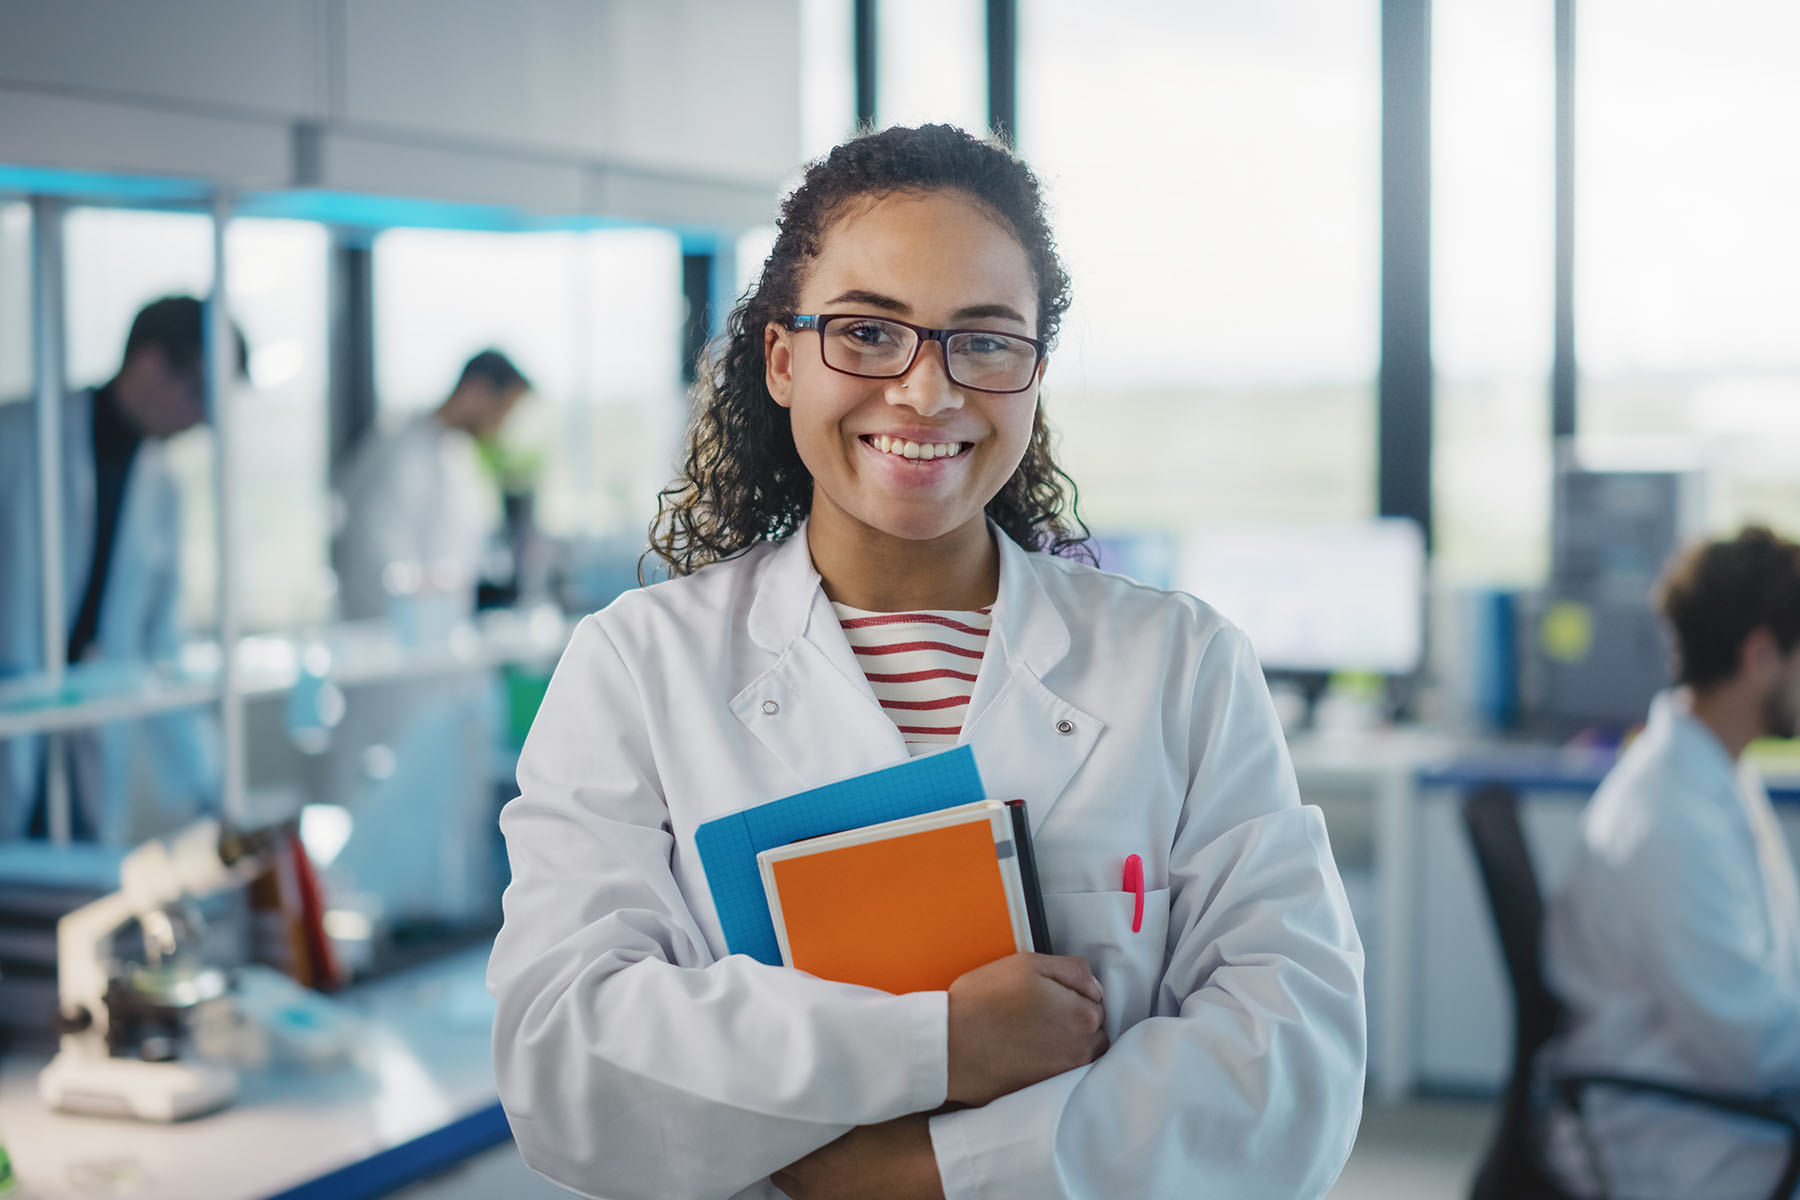 Woman in a lab wearing a lab coat and holding books